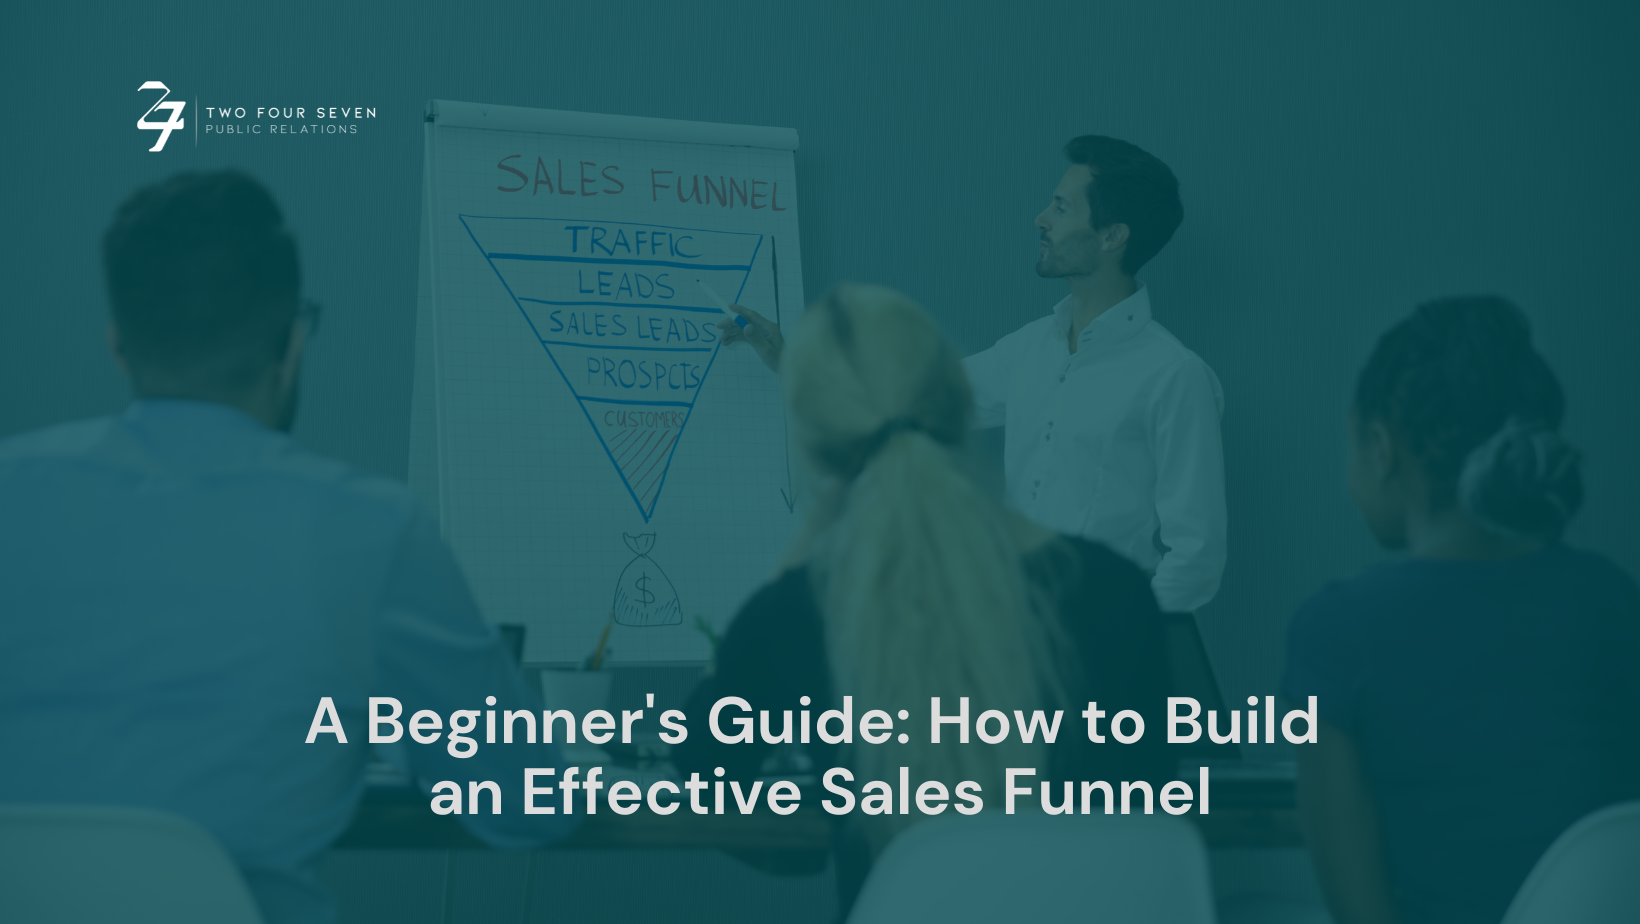 A Beginner’s Guide: How to Build an Effective Sales Funnel